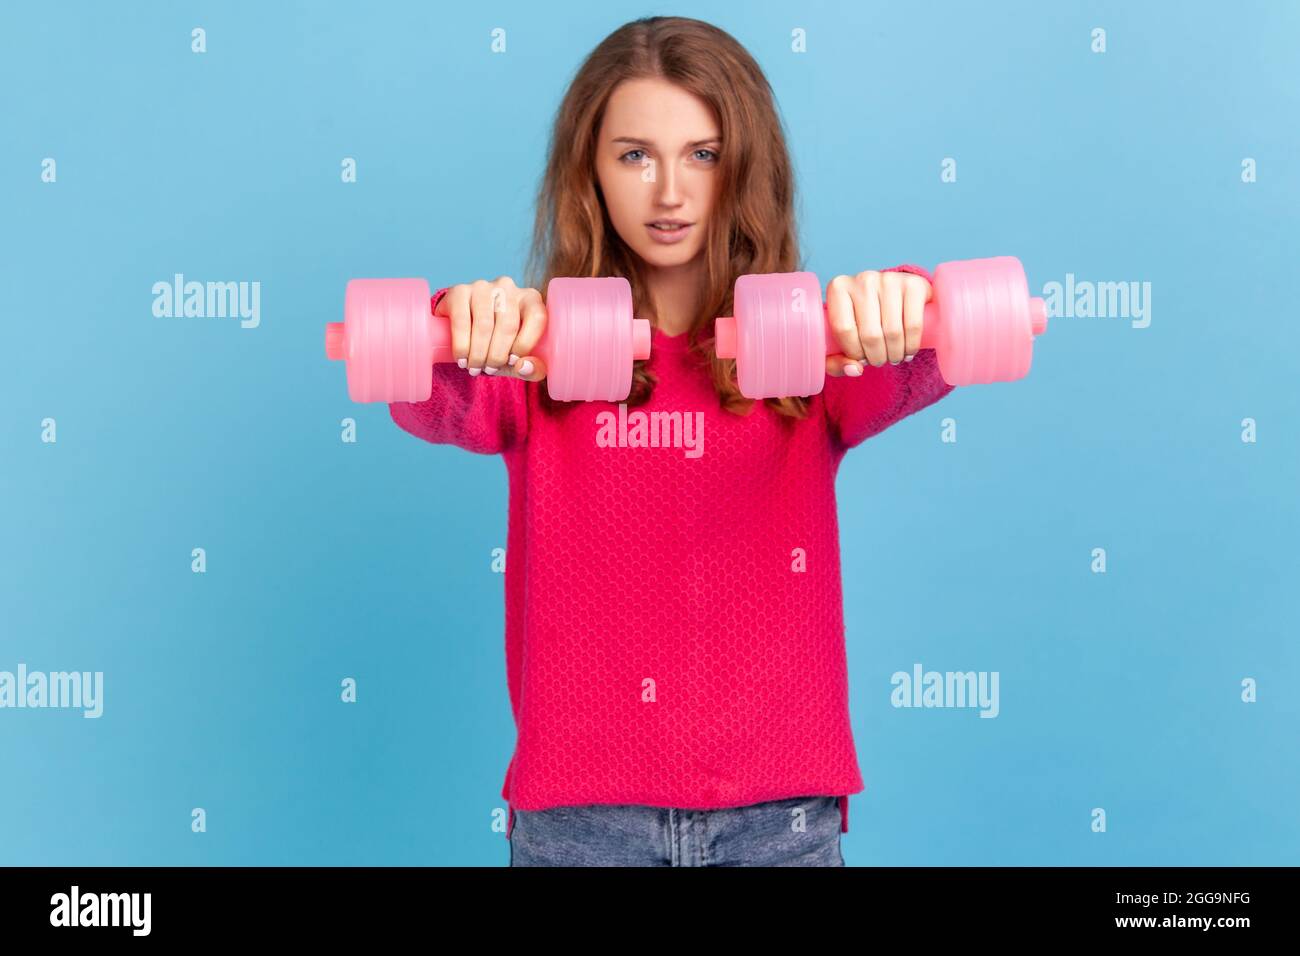 Winsome confident woman with wavy hair wearing pink pullover standing holding out two dumbbells, looking at camera, training her biceps. Indoor studio Stock Photo